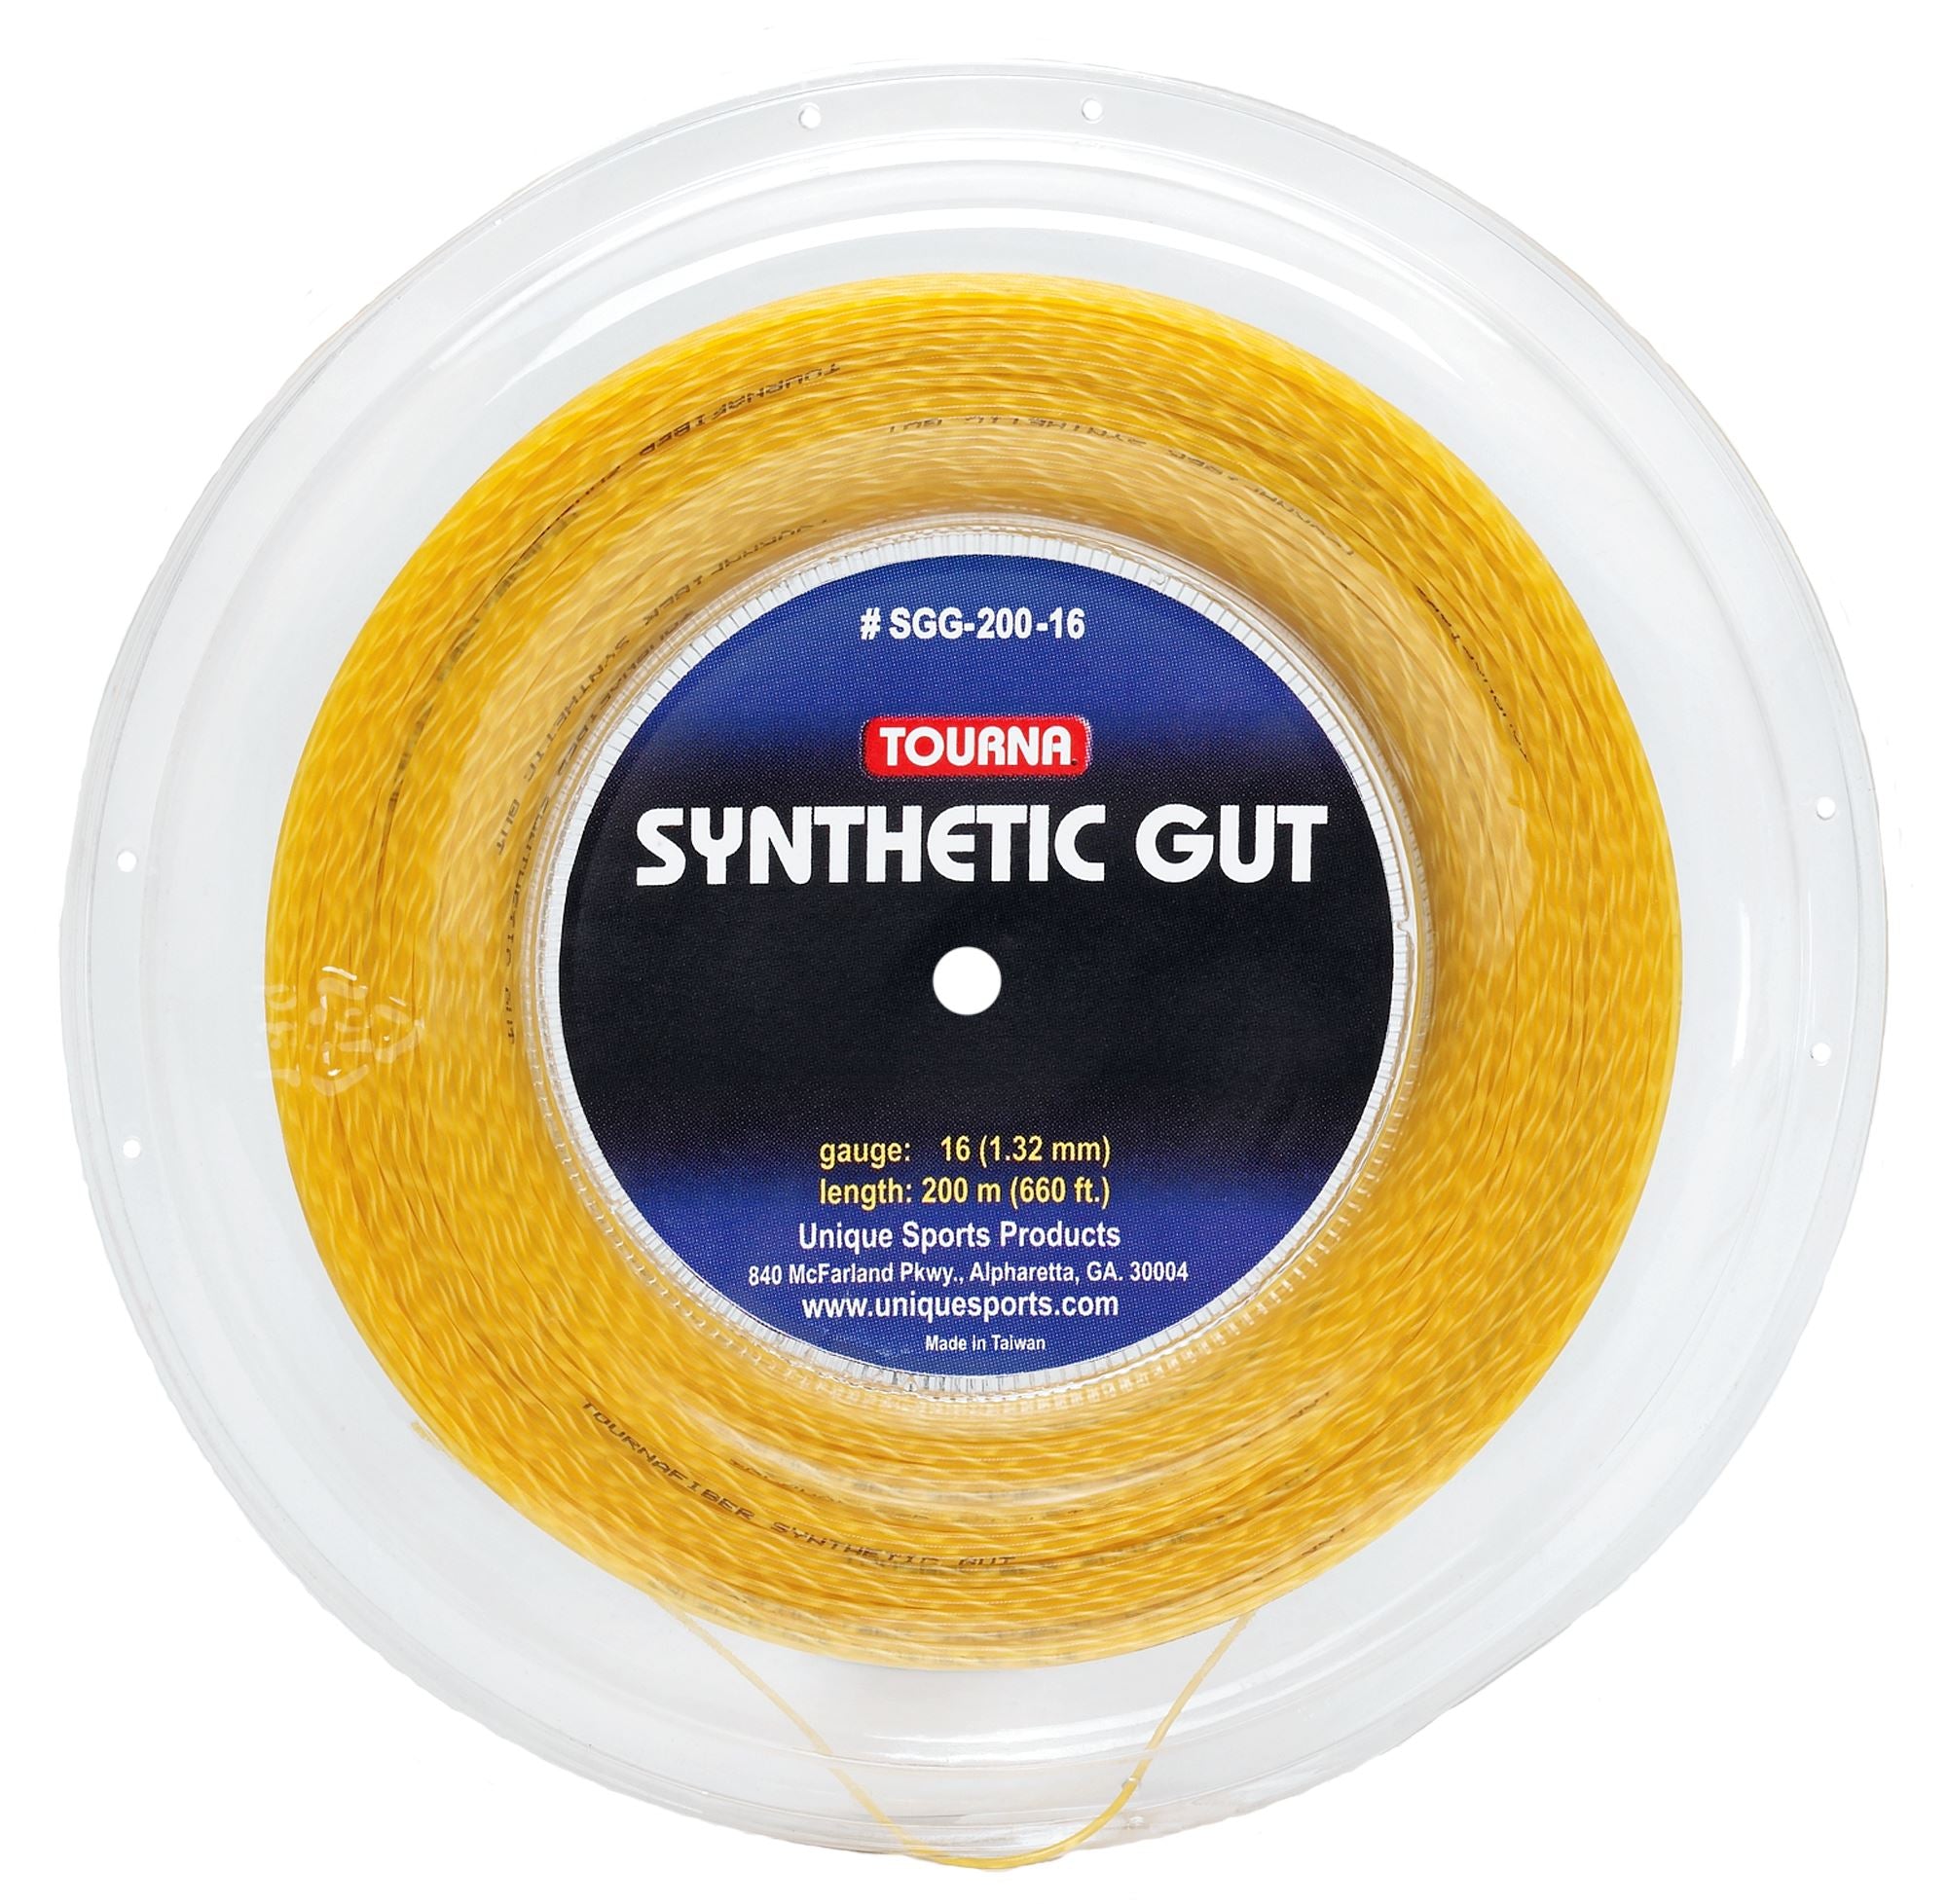 Tourna Synthetic Gut 16g Gold Tennis 200M/660Ft String Reel – Sports  Virtuoso